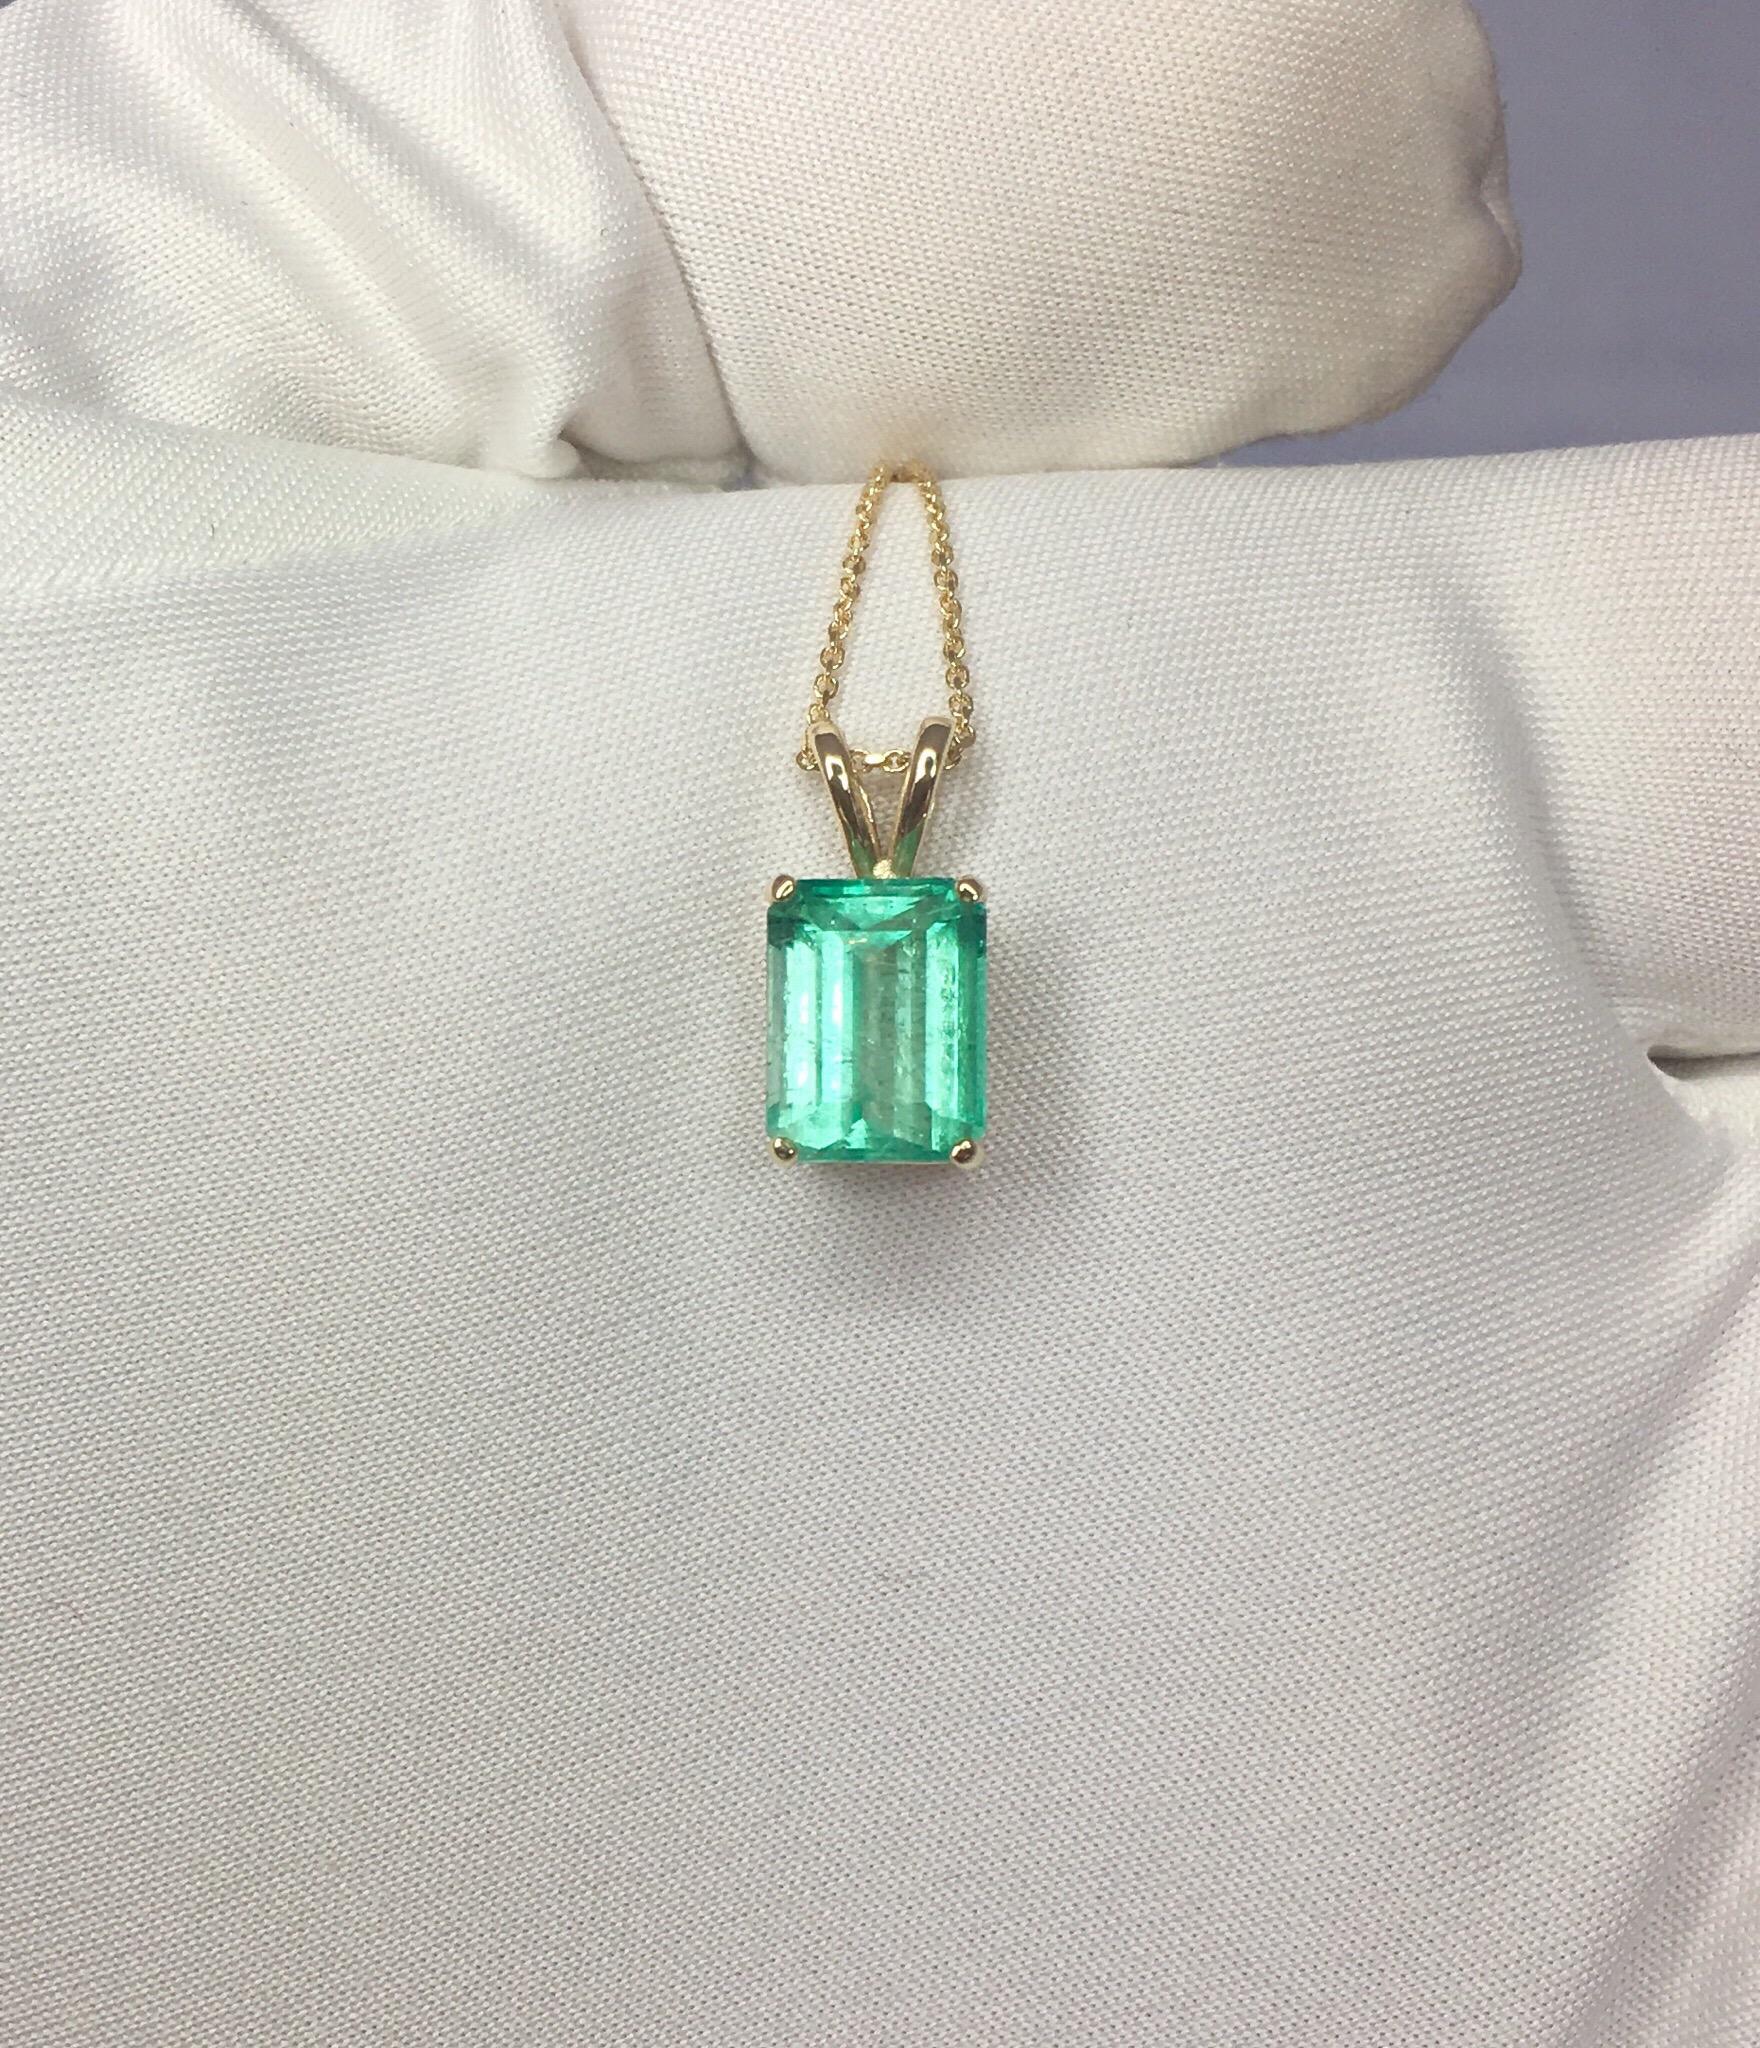 Beautiful bright green emerald set in a fine 14 karat yellow gold solitaire pendant.

2.32 carat emerald fully certified by IGI Antwerp confirming stone as natural and Colombian in origin.

Also has an excellent emerald cut and polish to show lots